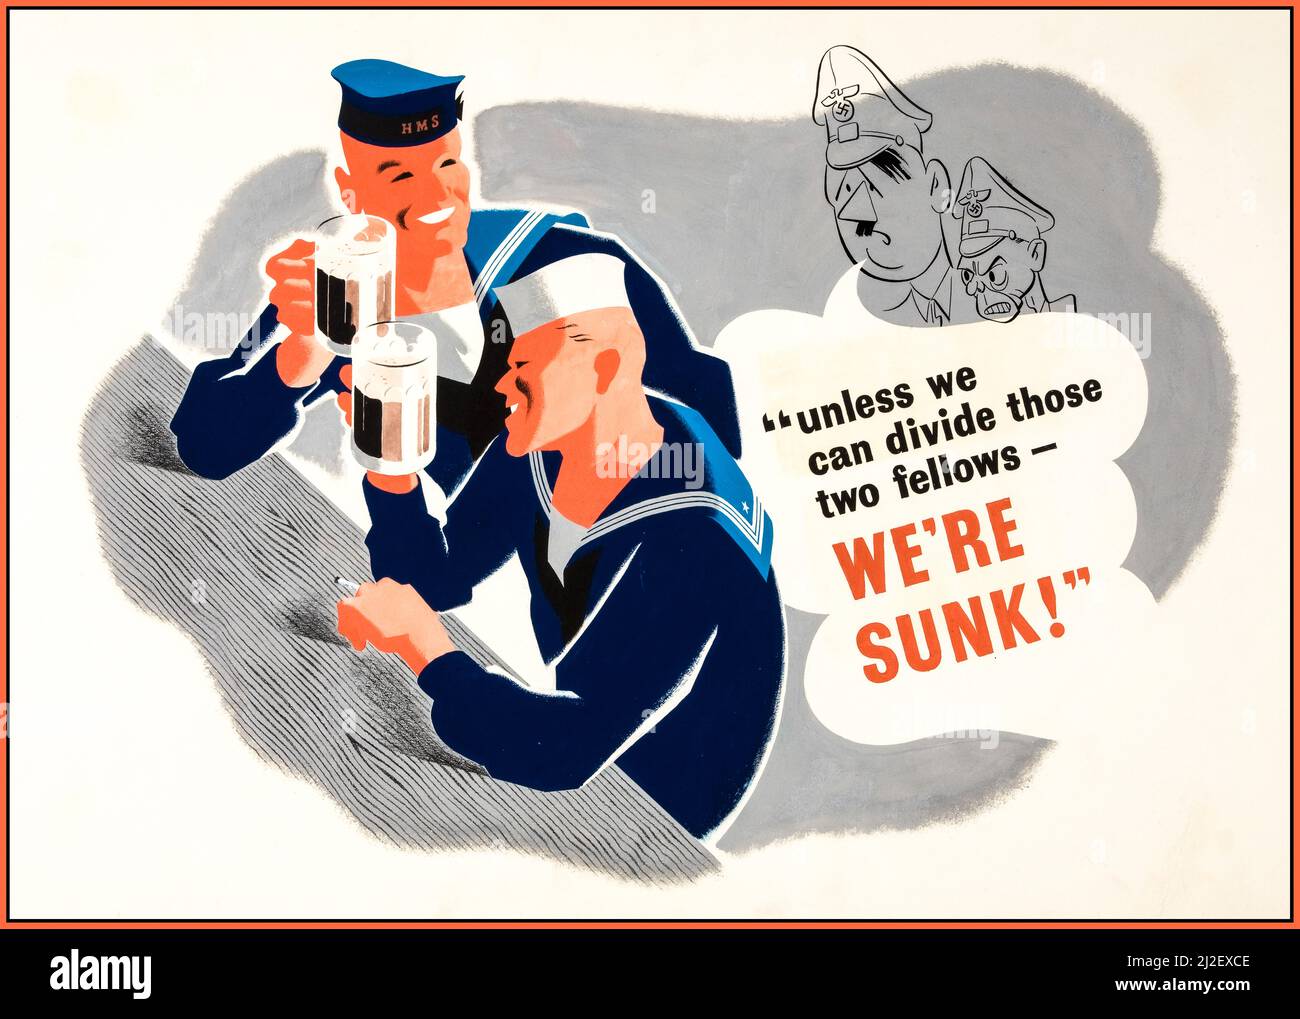 WW2 Propaganda Poster 'Unless we can divide those two fellows - we're sunk!' World War II propaganda poster focusing on the Anglo-American alliance. Cartoon Caricature Hitler and Goebbels are in the background. World War II Second World War Date between 1940 and 1945 Stock Photo